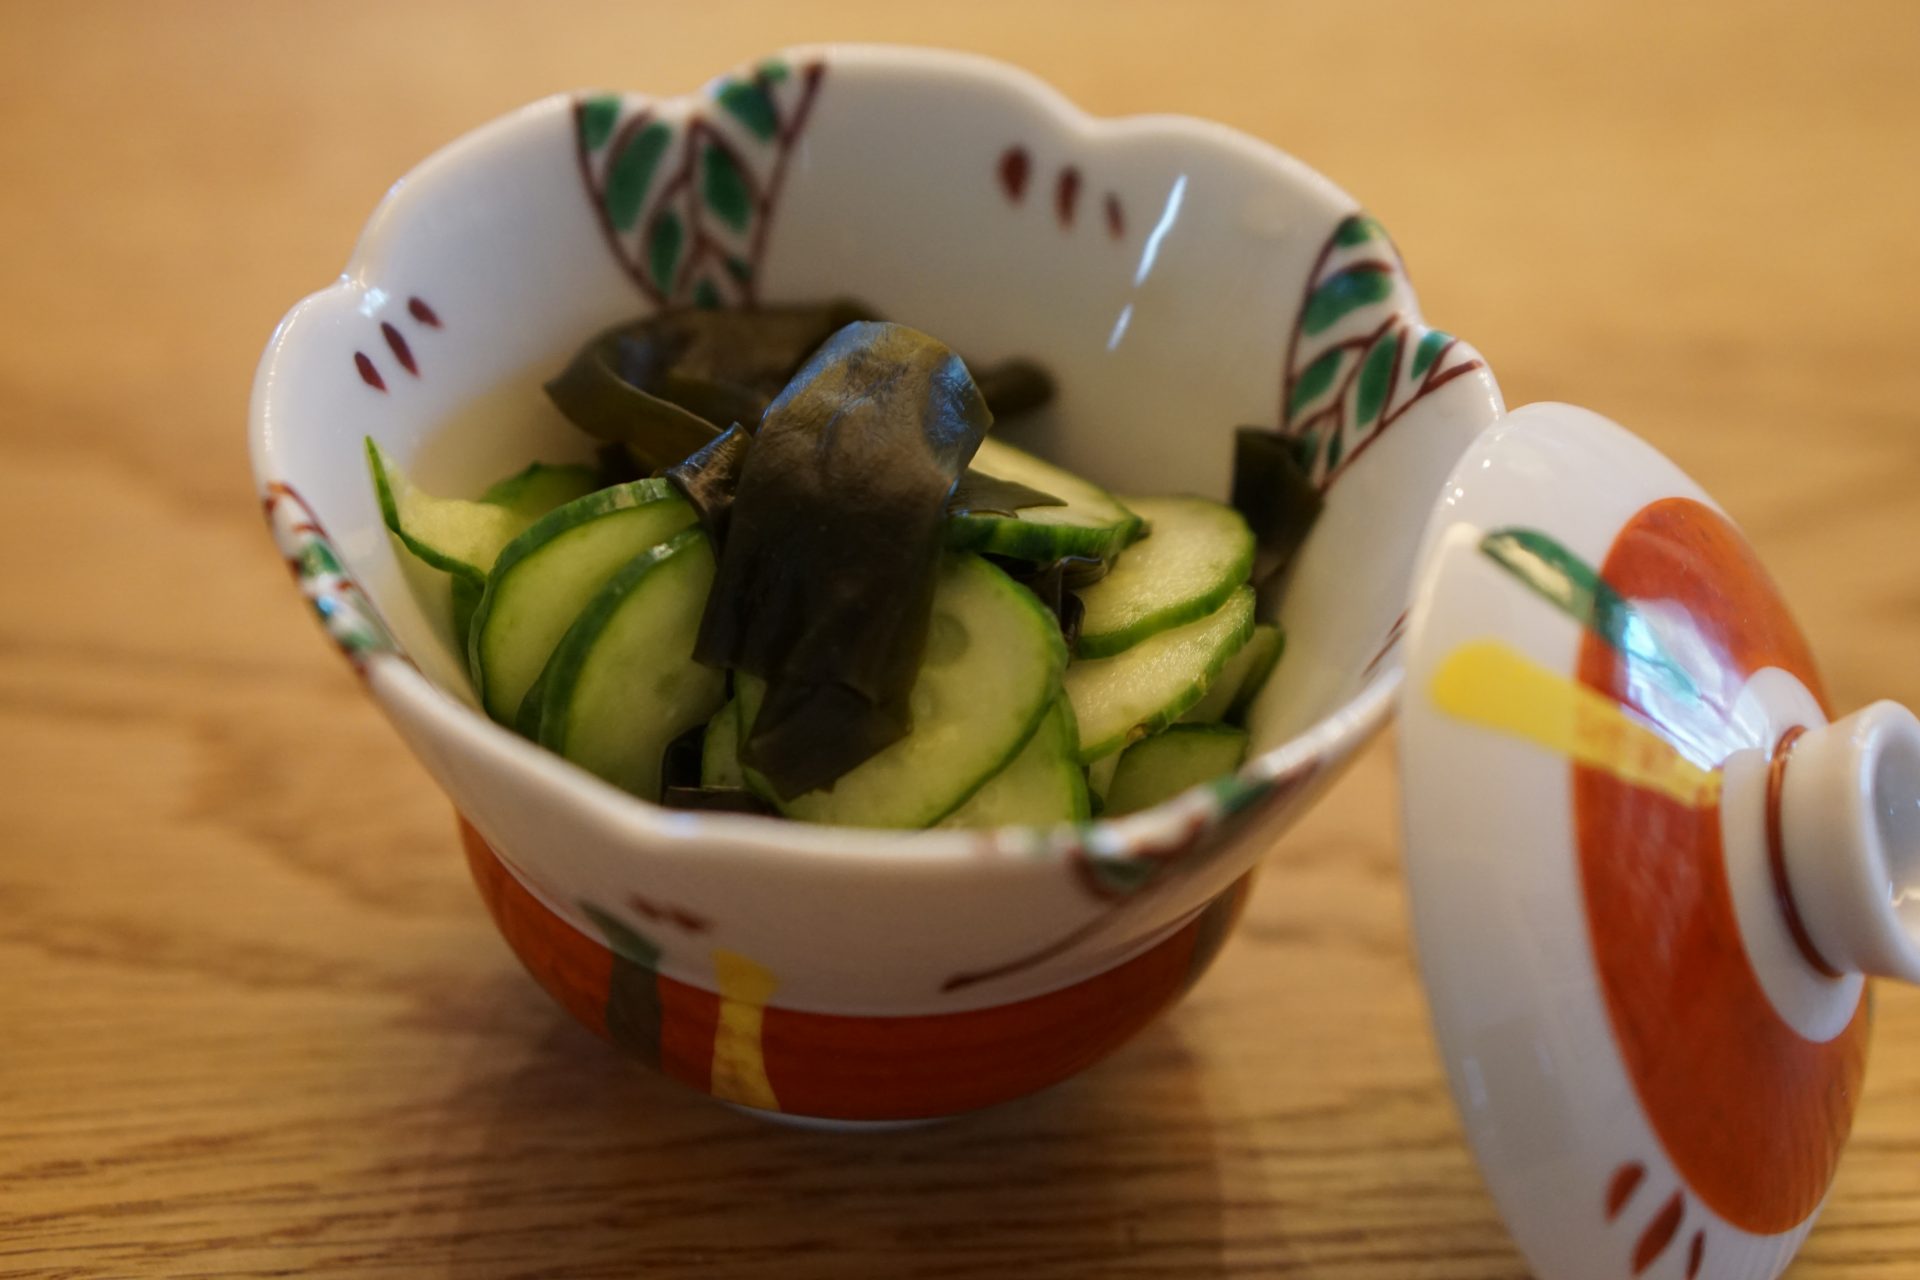 Cucumber and wakame in vinegar dressing